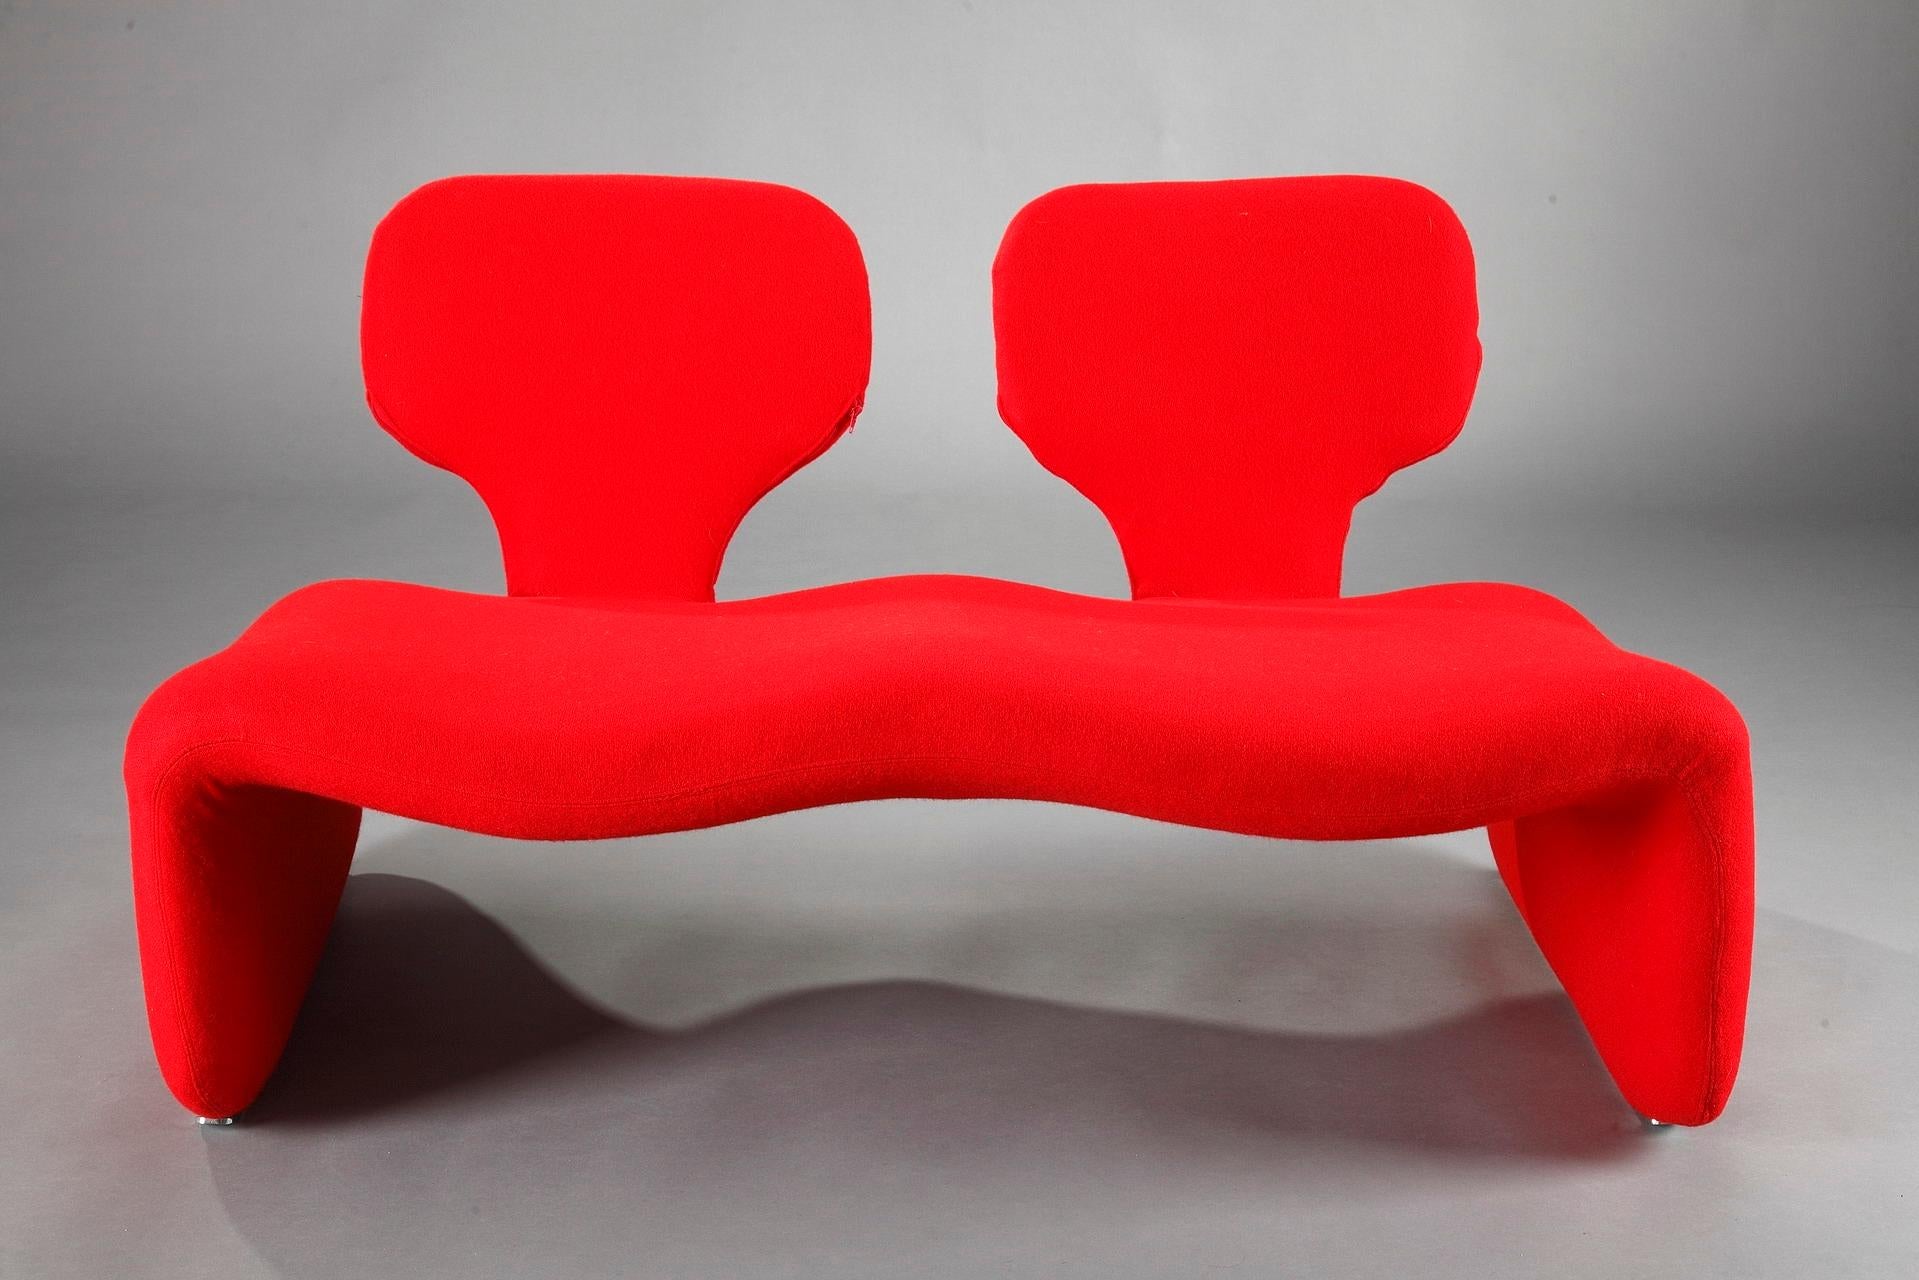 Two-seat vintage Djinn sofa designed by Olivier Mourgue in 1965 for Airborne. Metal structure lined with foam and covered with red fabric from the publisher Kvadrat. Steel skates. This sofa is an icon of the 20th century design made famous by